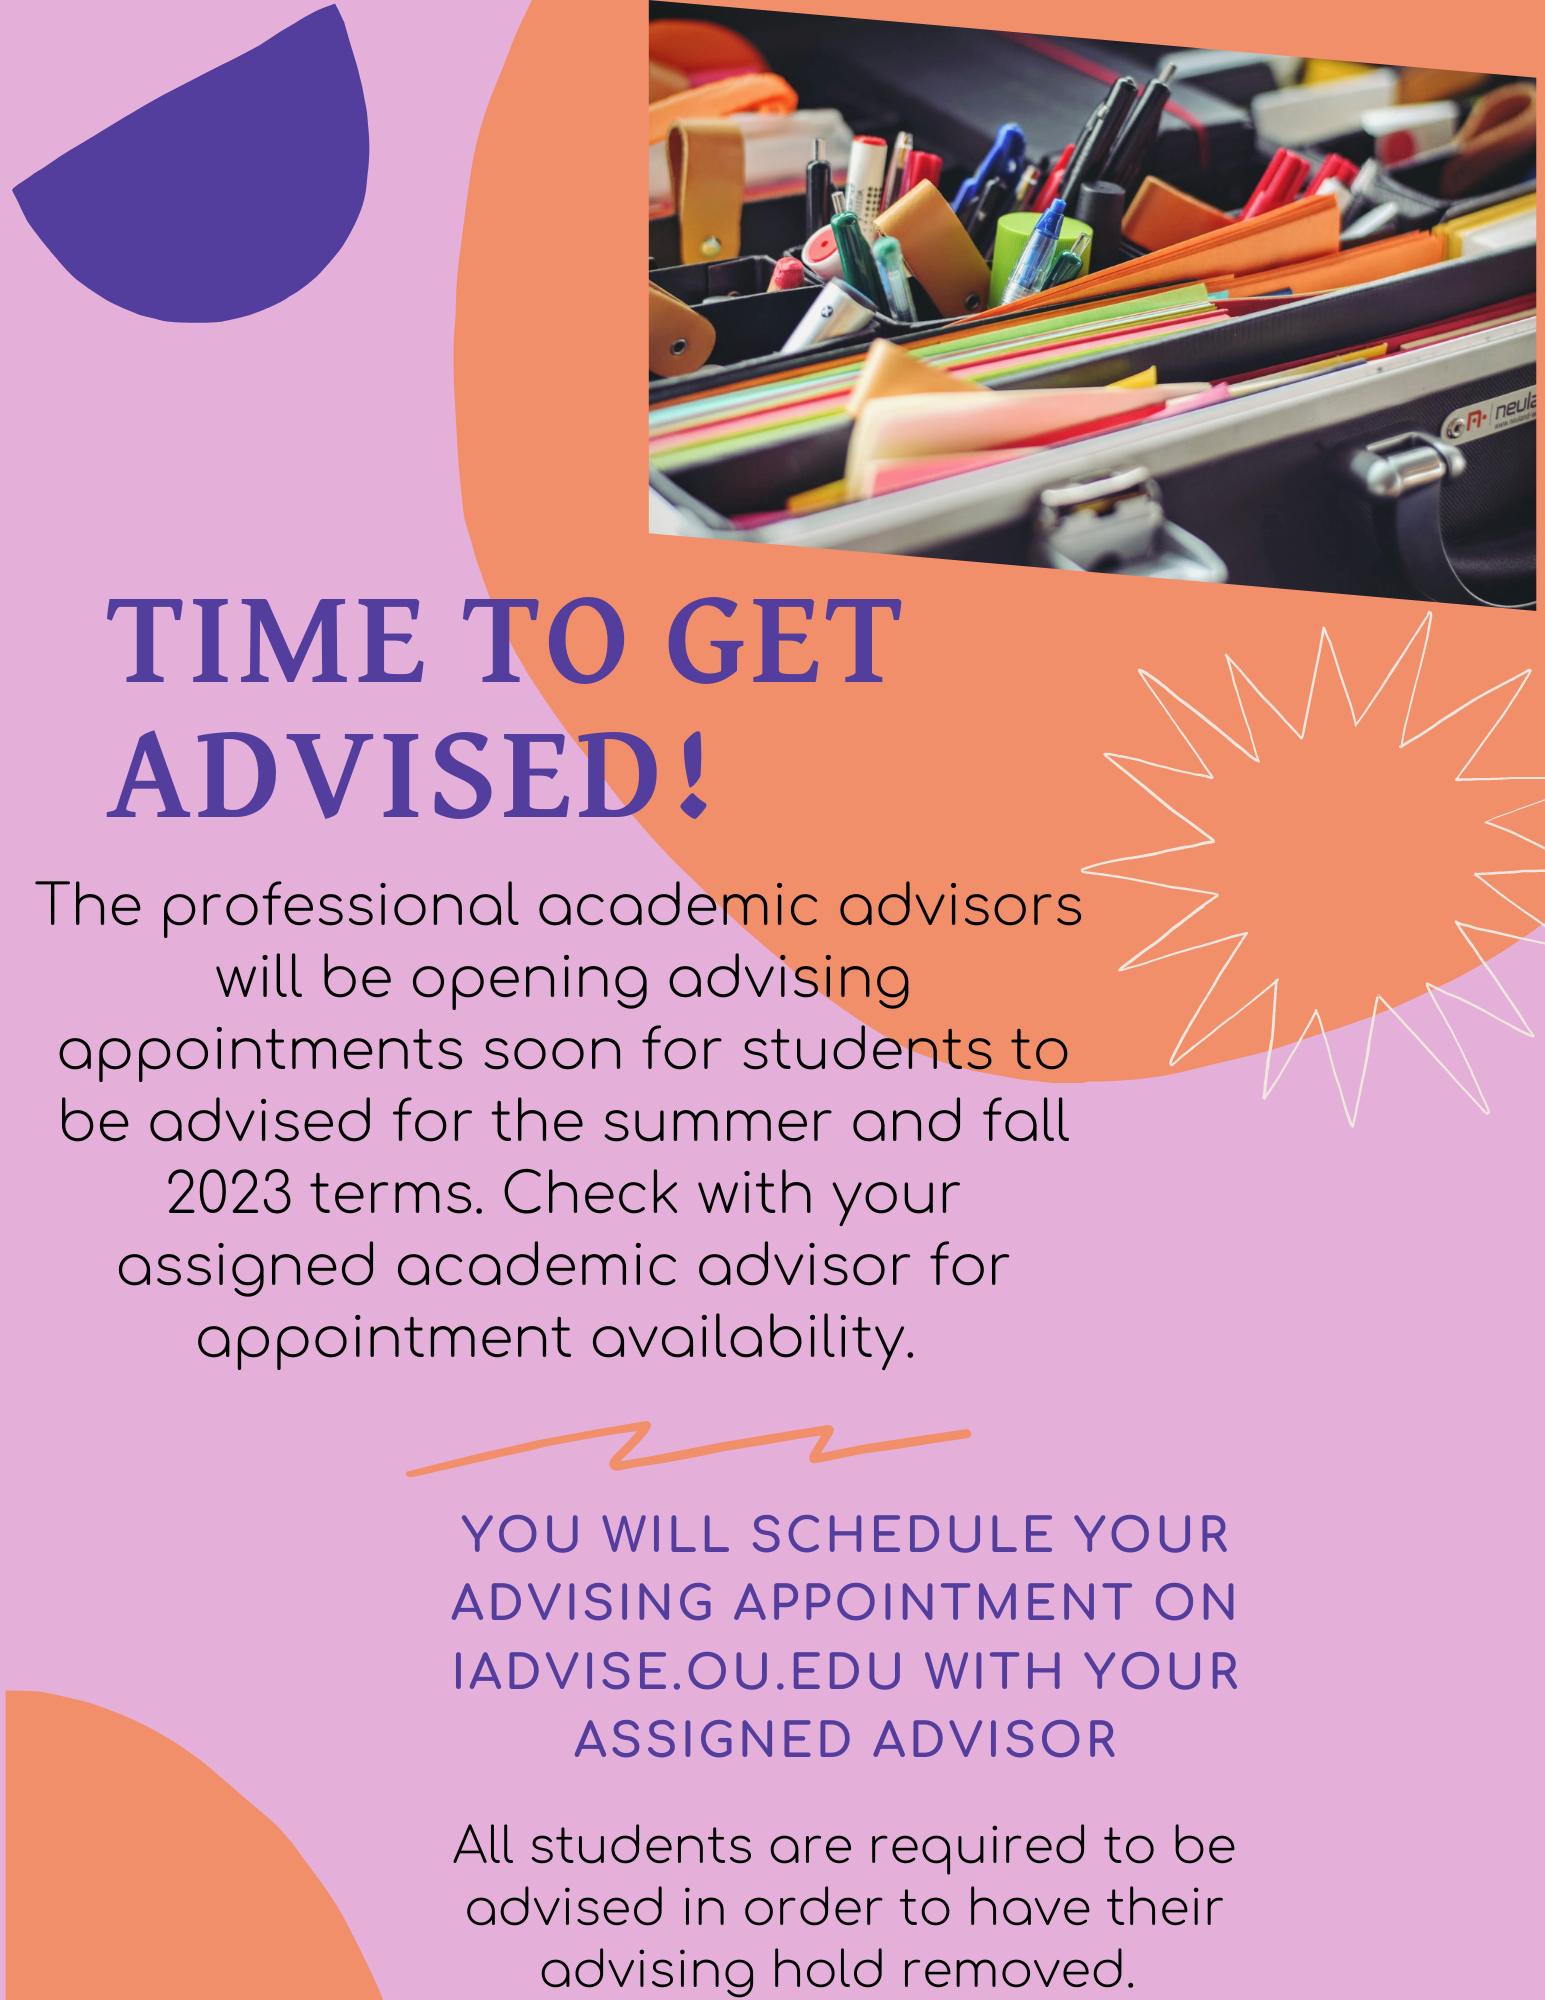 "TIME TO GET ADVISED!" The professional academic advisors will be opening advising appointments starting SEPTEMBER 13th for students to be advised for the Spring 2022 semester. You will schedule your advising appointment on iadvise.ou.edu with your assigned advisor. All students are required to be advised in order to have their advising hold removed.